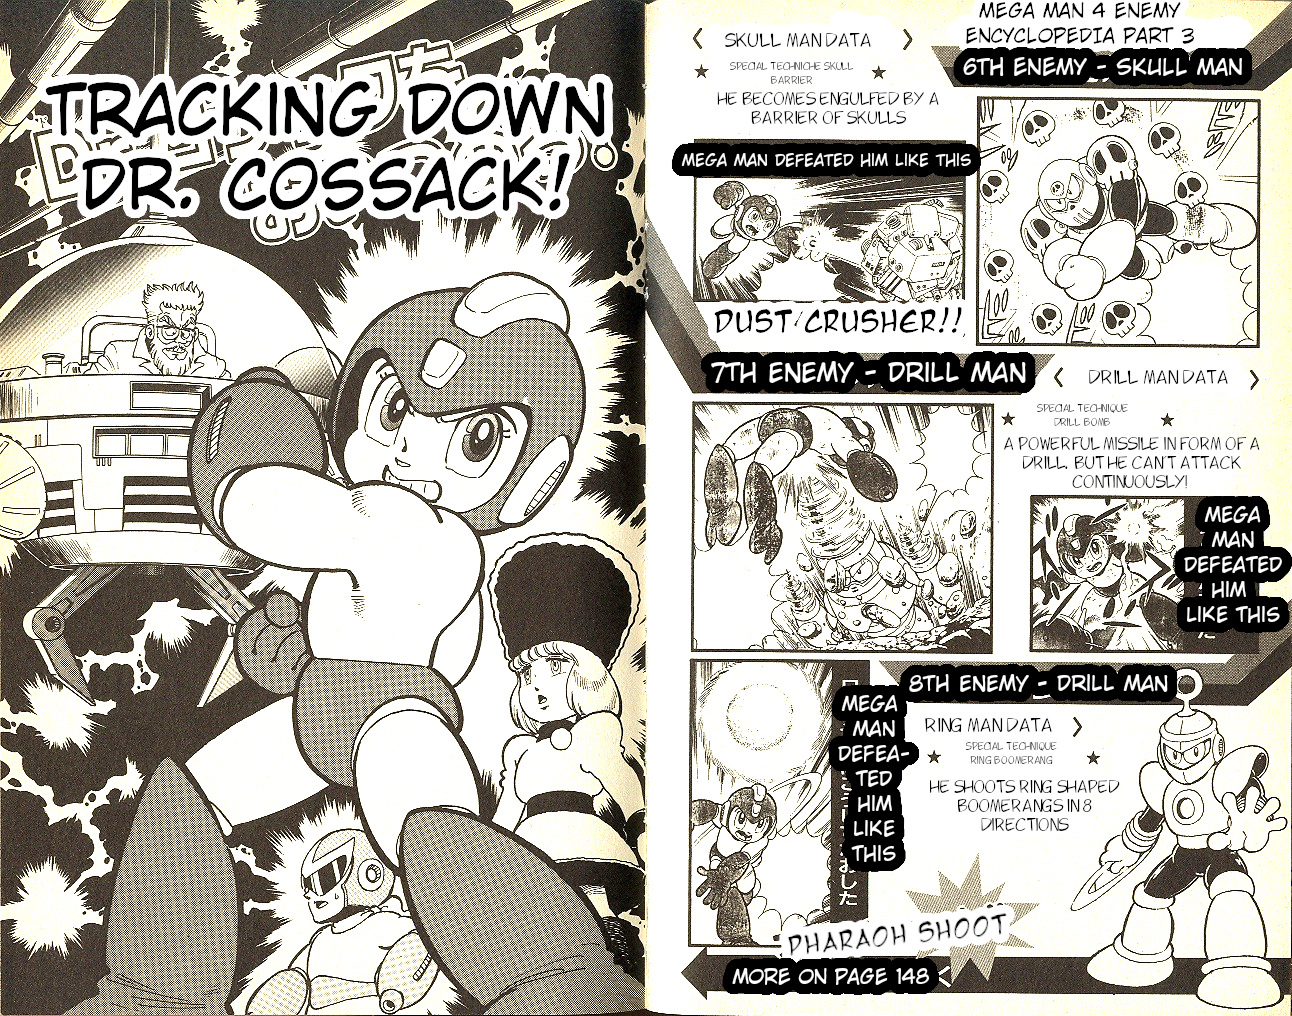 Rockman 4 Vol. 1 Ch. 4 Tracking Down Dr. Cossack